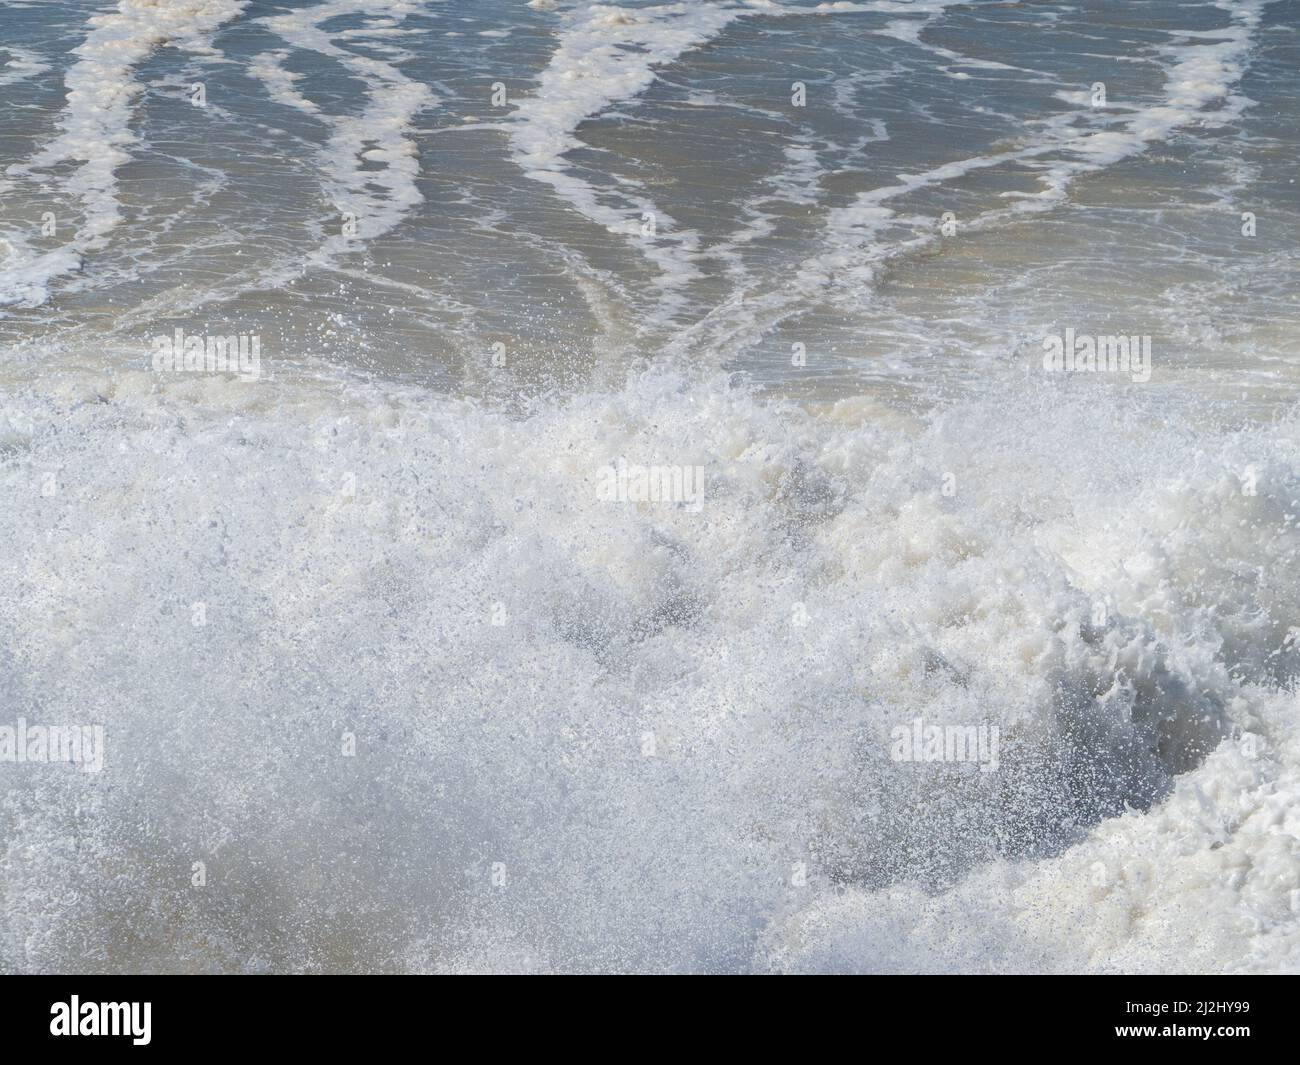 Closeup of Ocean waves crashing on rocks on shore, splashing, sea spray up, leaving swirly natural line patterns in the salty water, force of nature Stock Photo